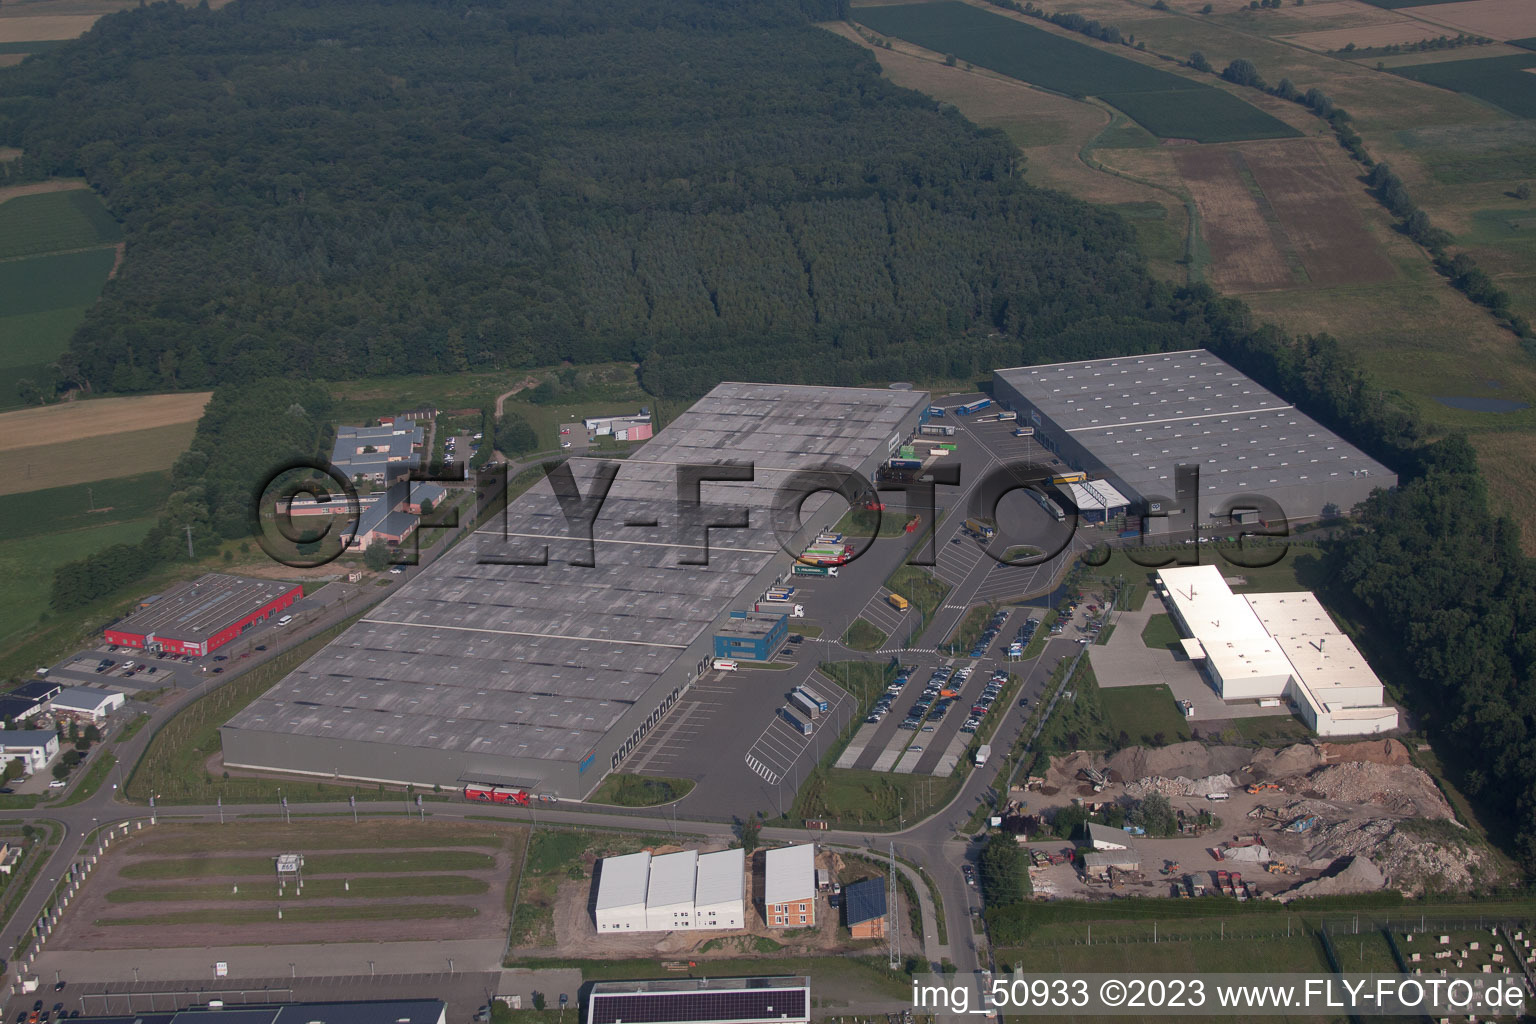 Horst industrial area, coincidence logistics center in the district Minderslachen in Kandel in the state Rhineland-Palatinate, Germany out of the air